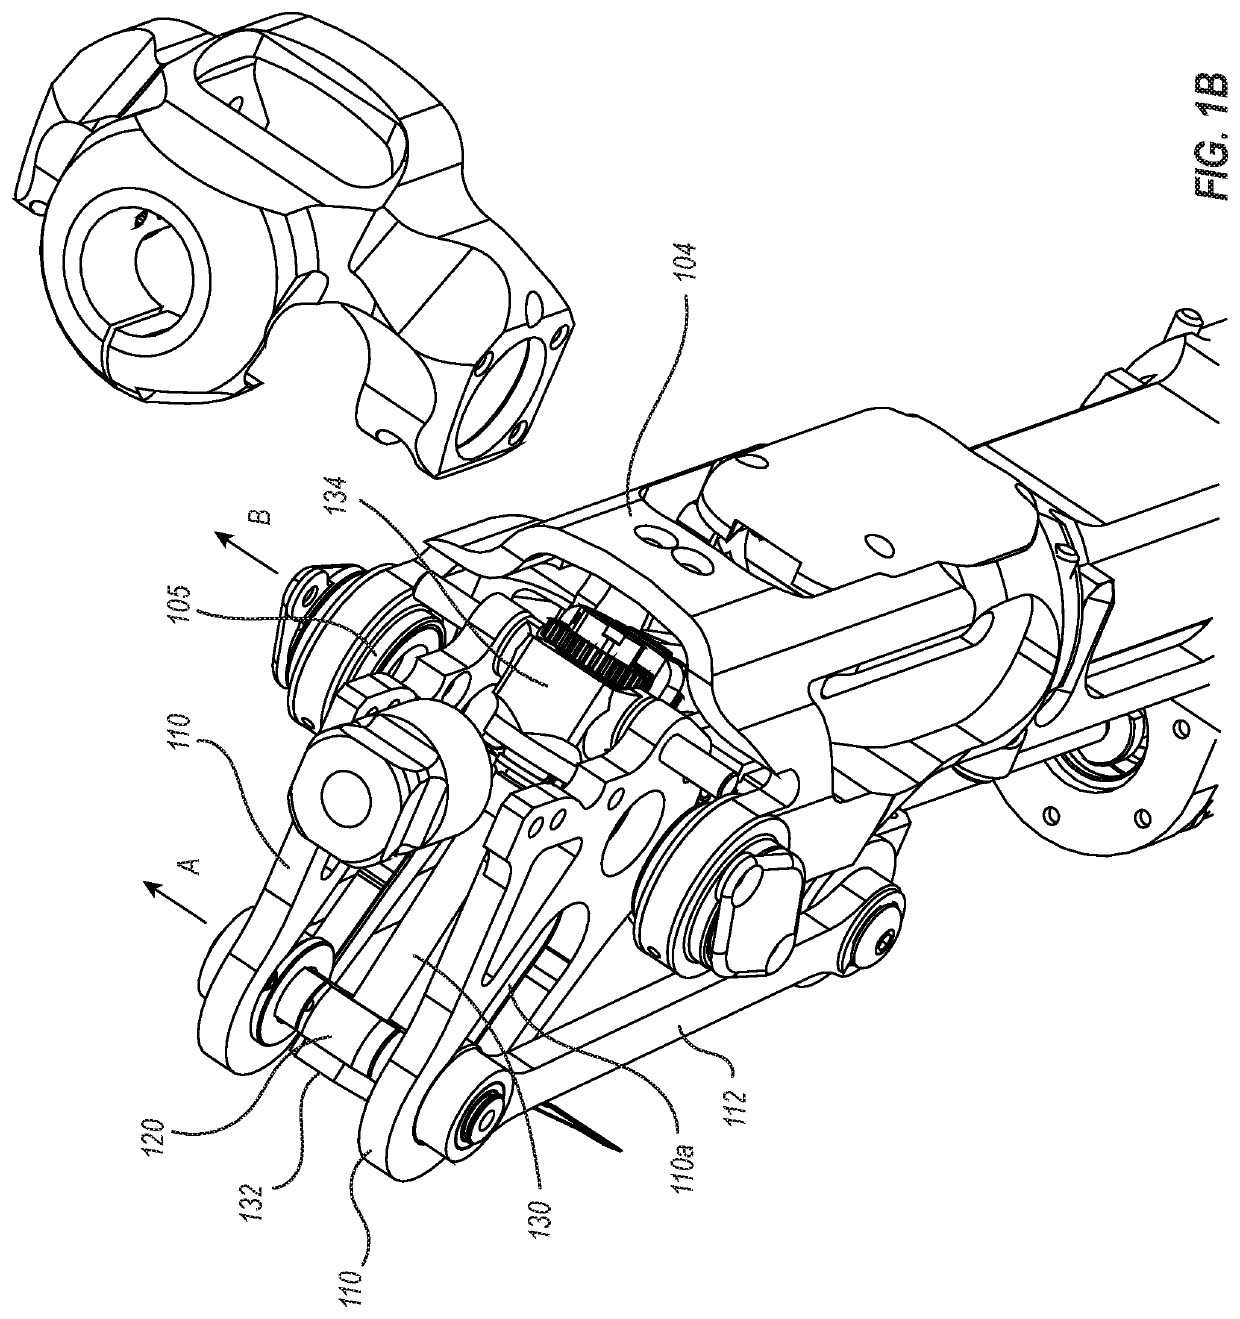 Variable transmission for assistive prosthesis device